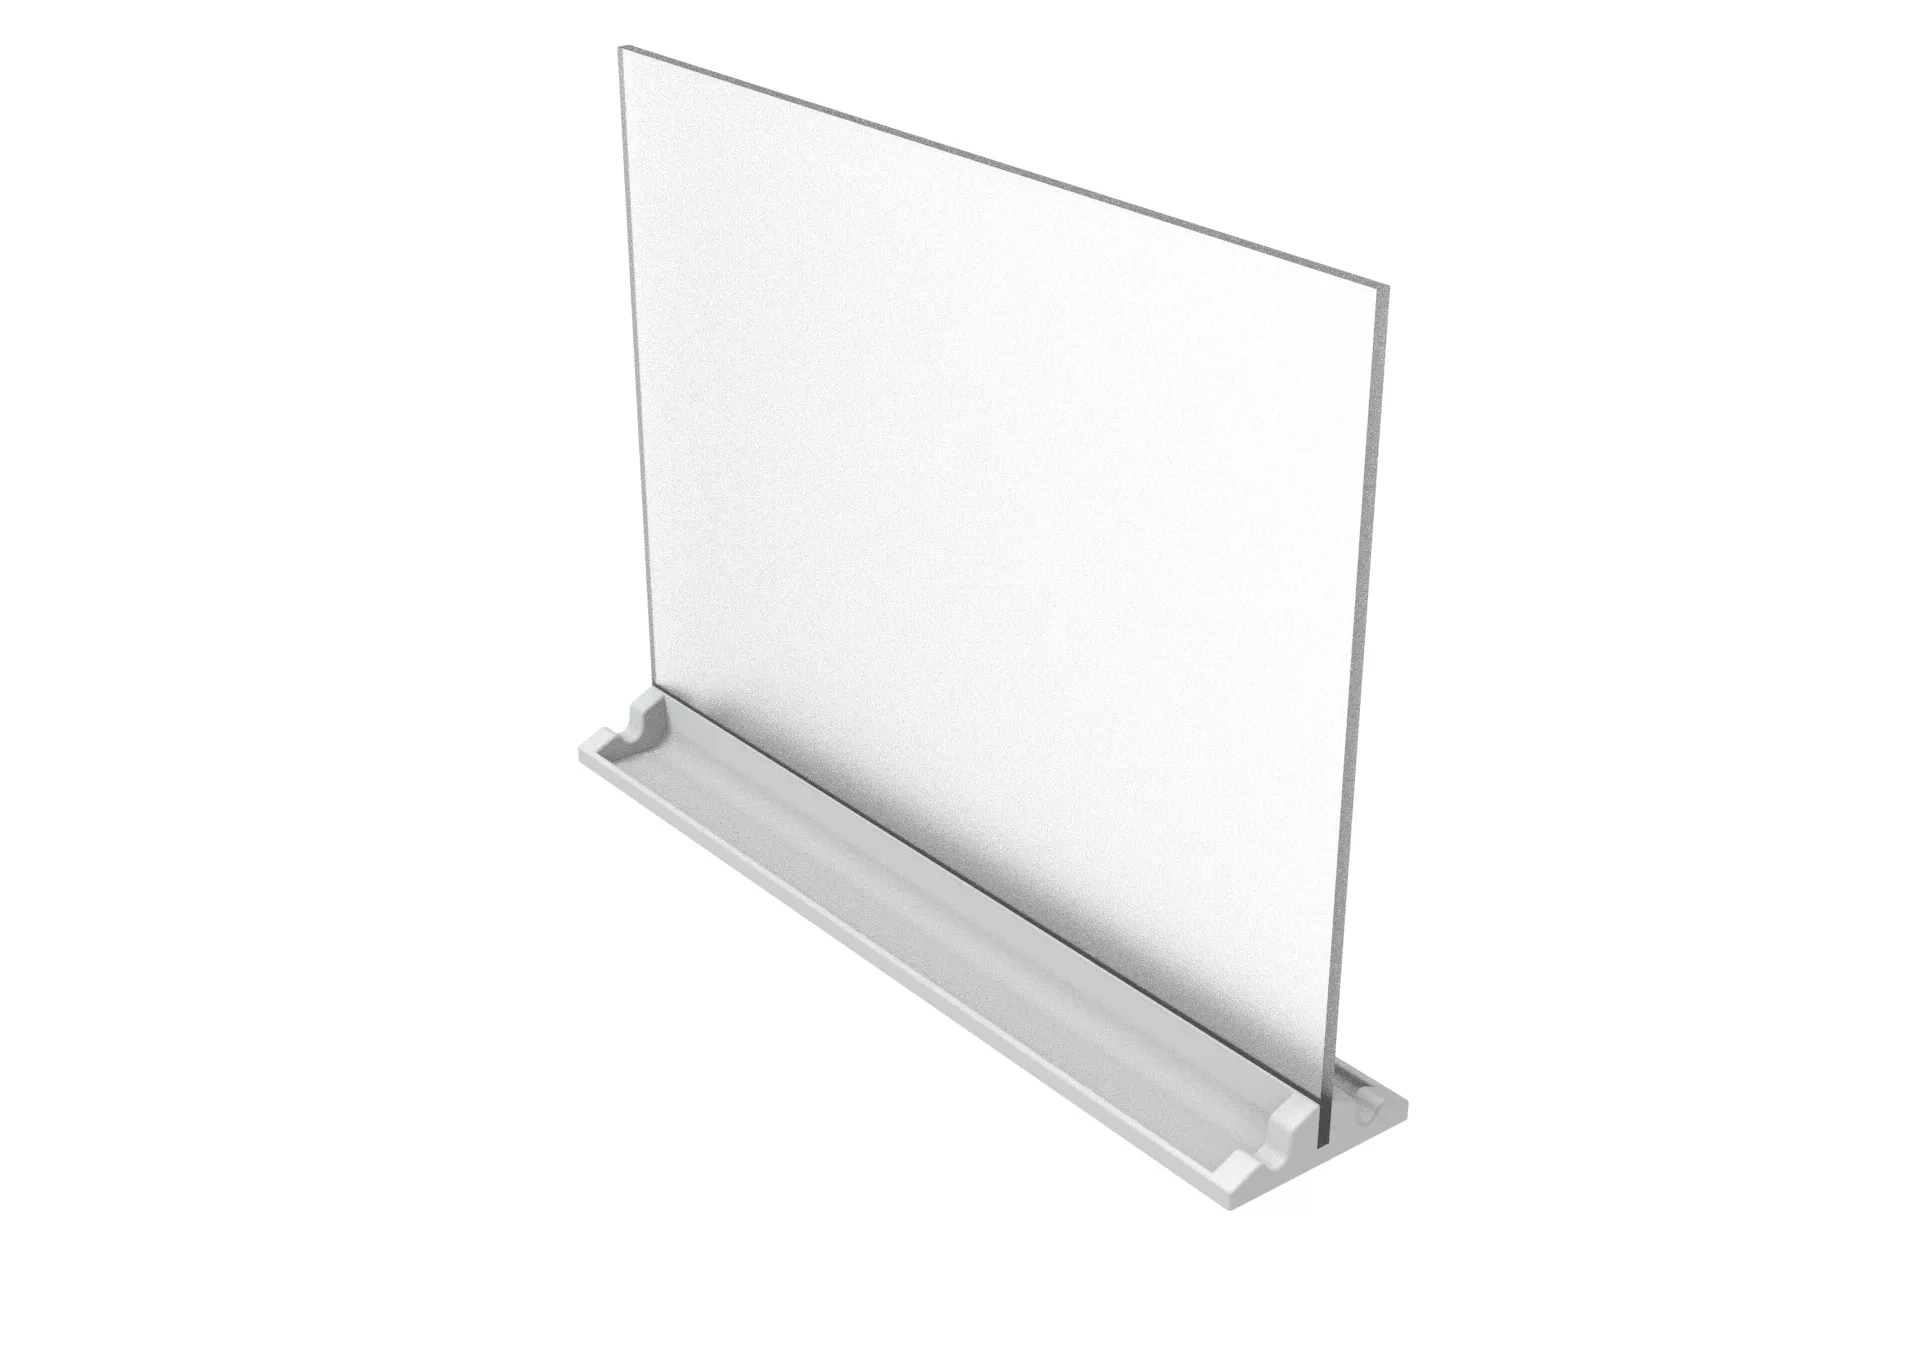 Which color is the best glass whiteboard